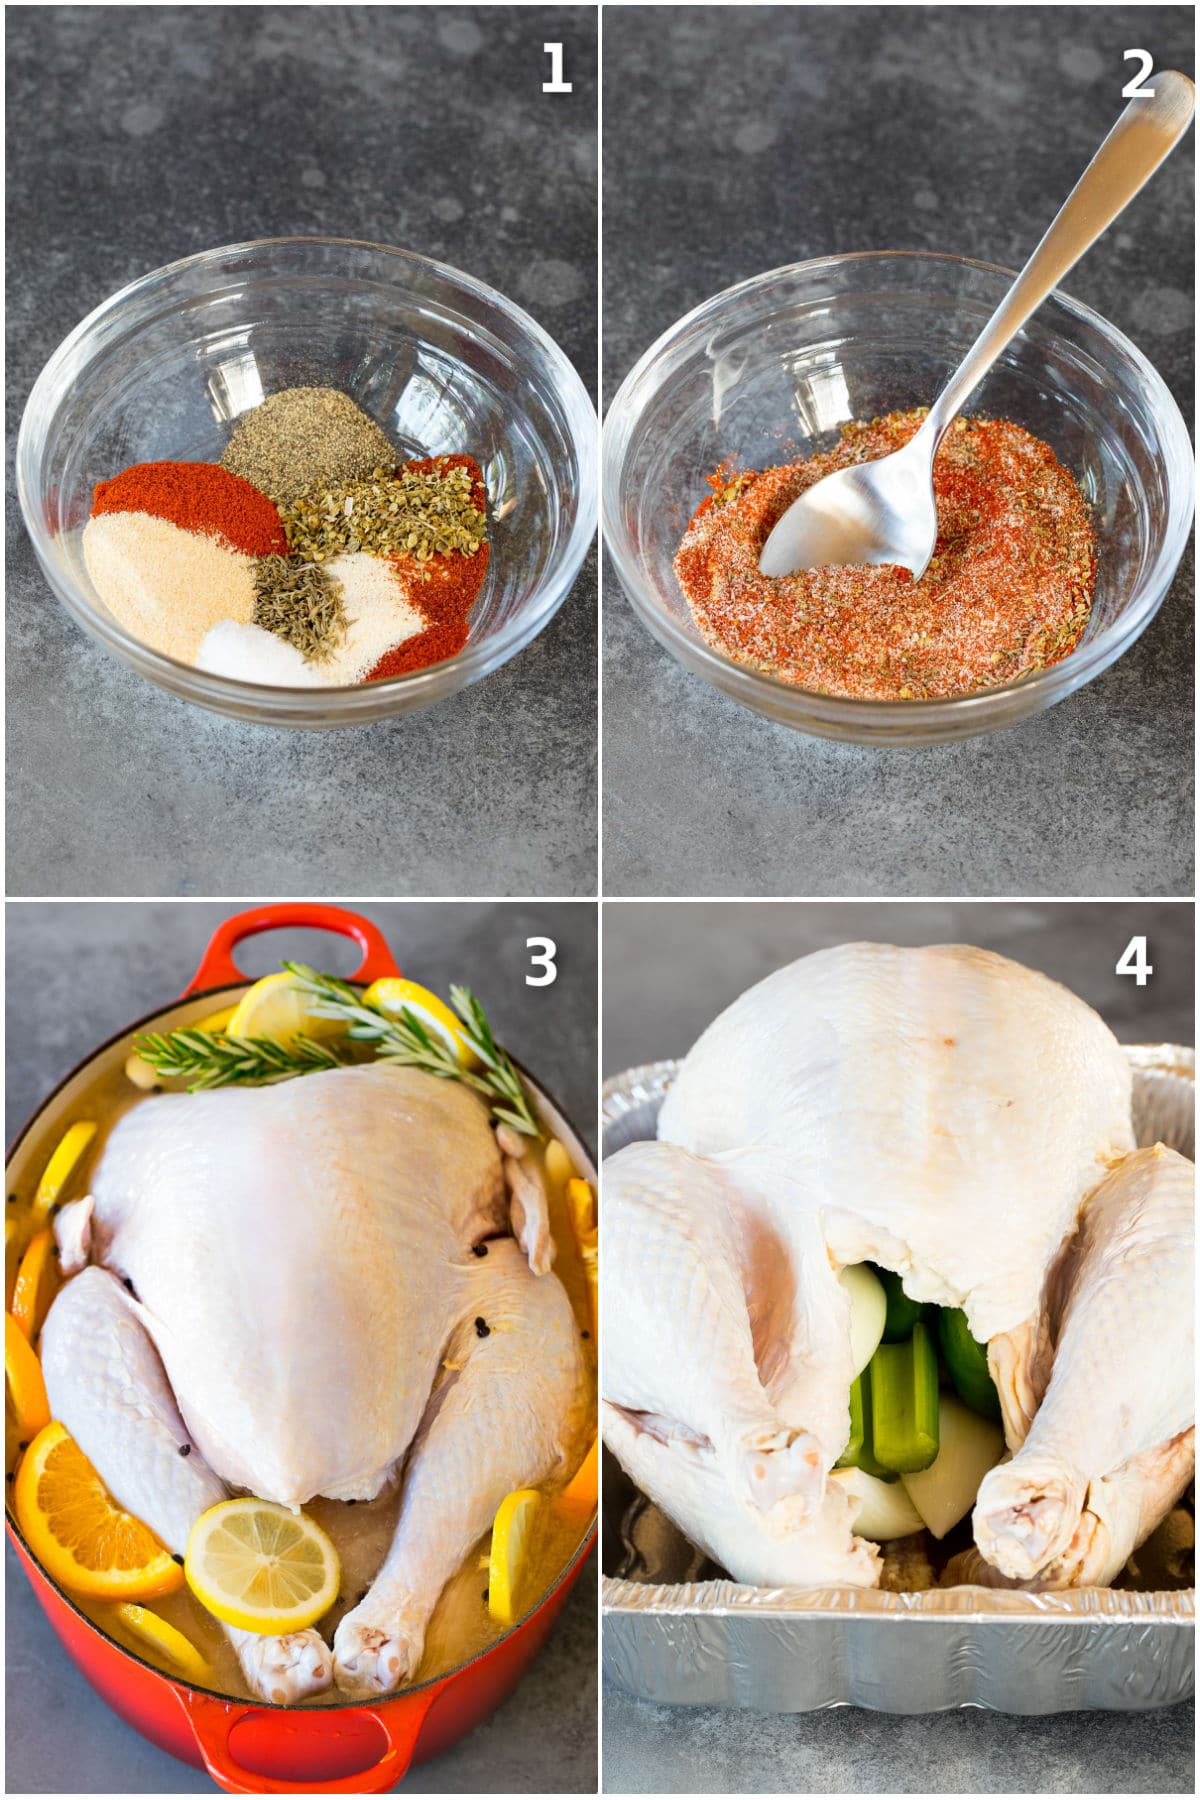 Spices being mixed together and a turkey being brined and stuffed.